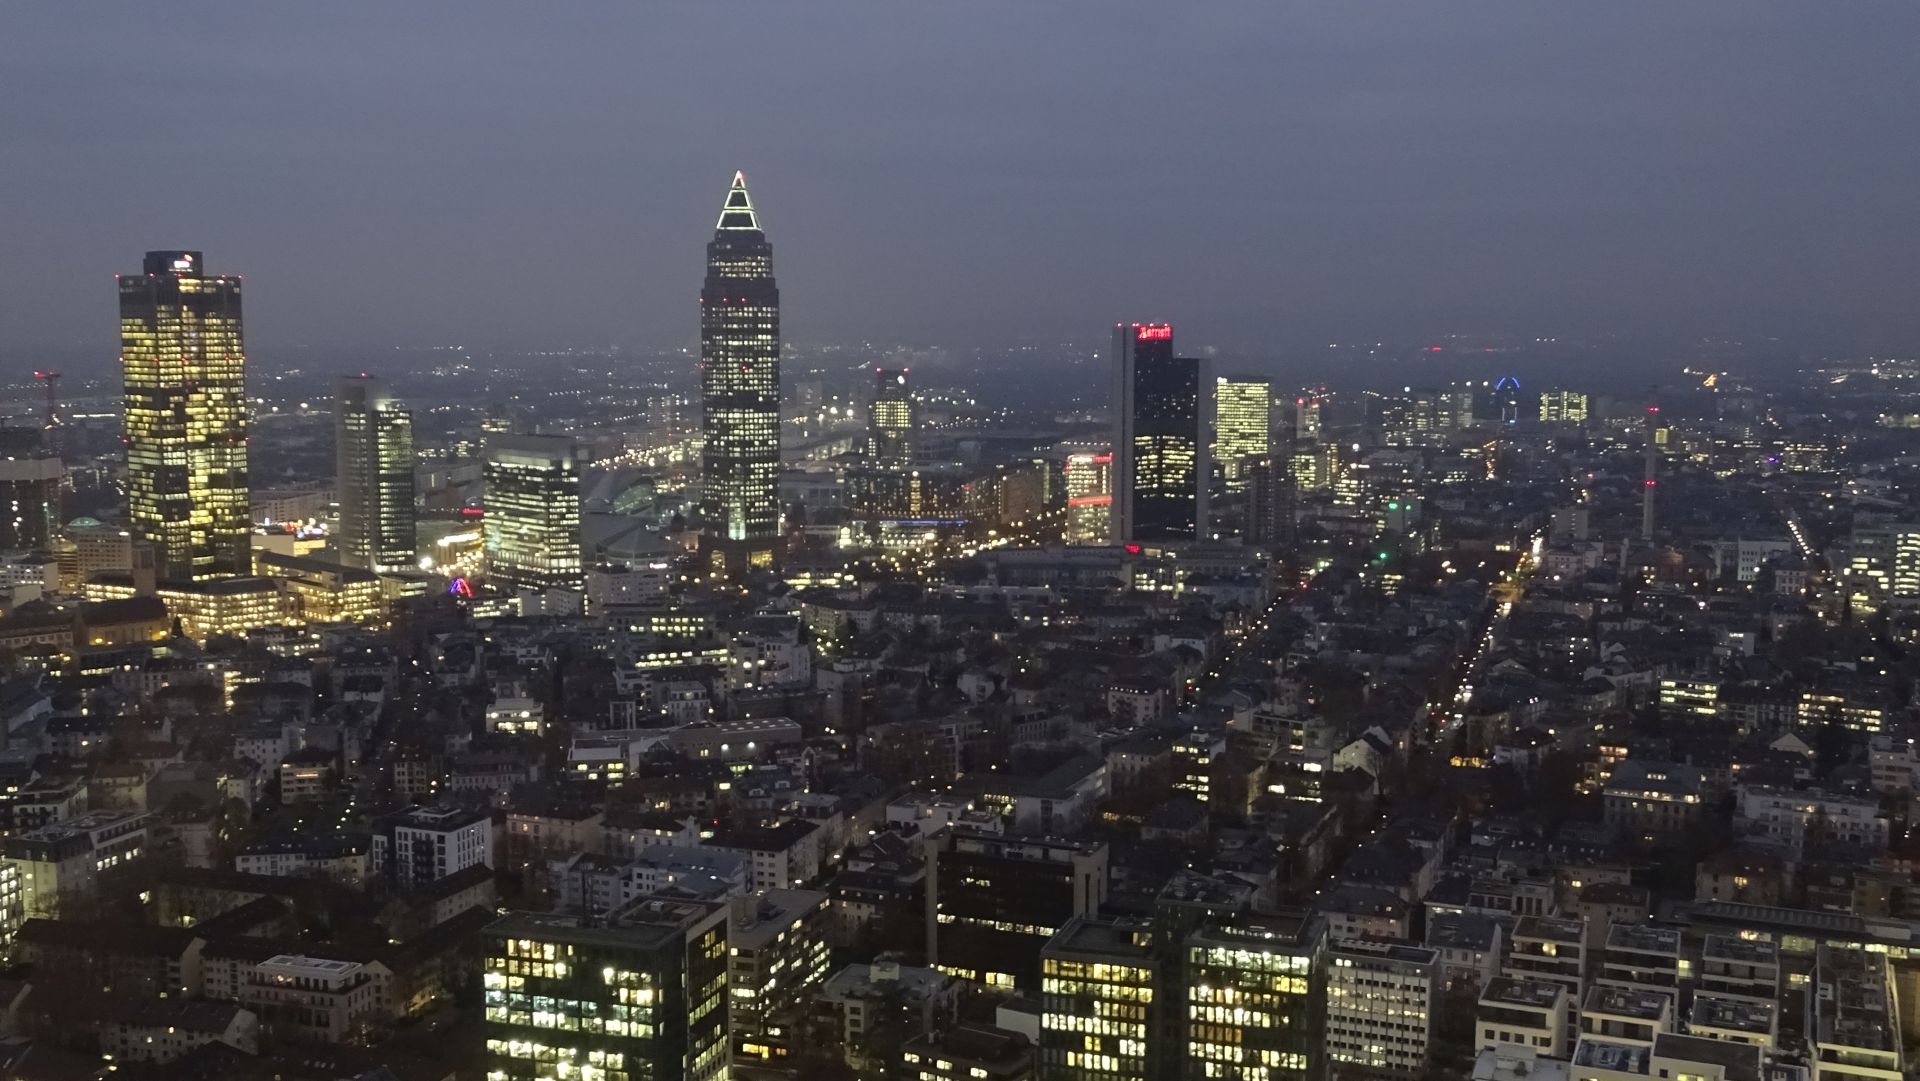 Frankfurt am Main is one of the most important financial centres in Europe